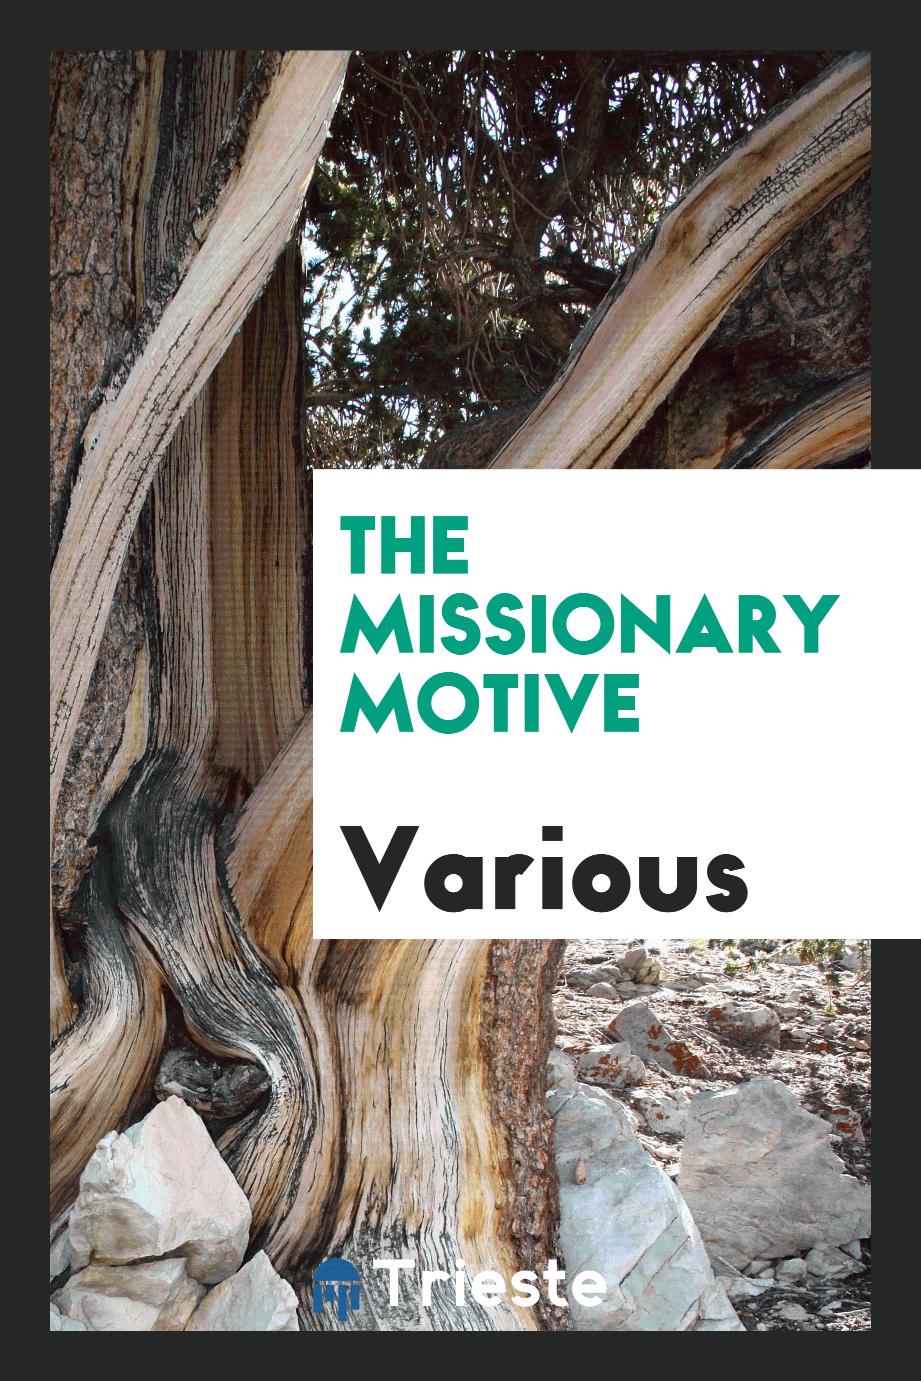 The missionary motive